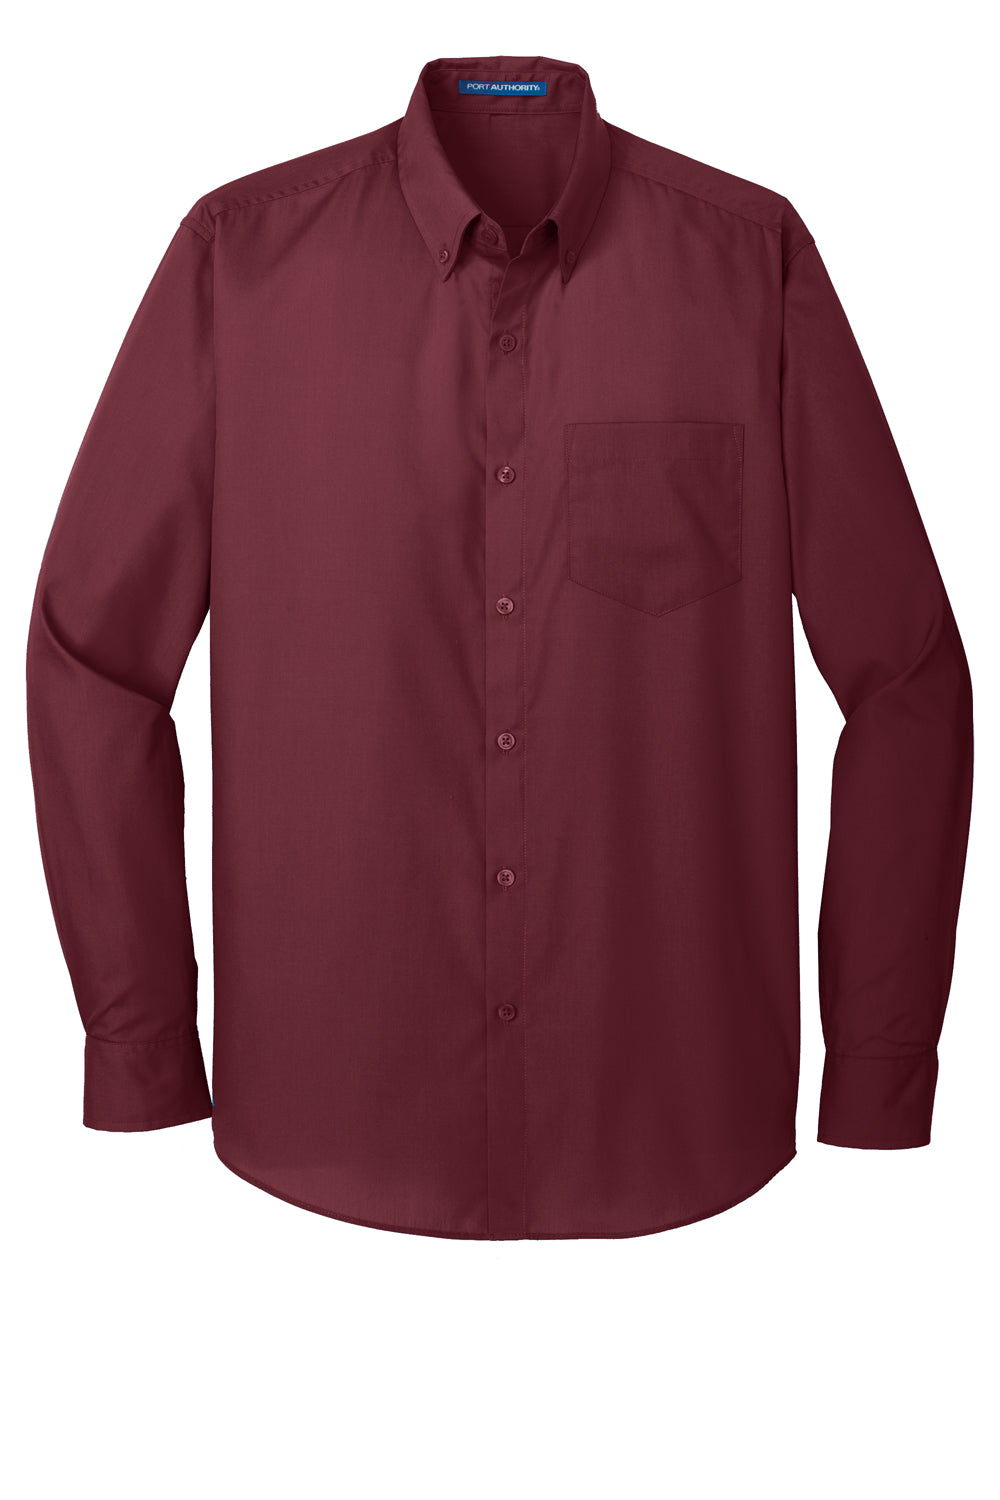 Port Authority W100/TW100 Carefree Stain Resistant Long Sleeve Button Down Shirt w/ Pocket Burgundy Flat Front